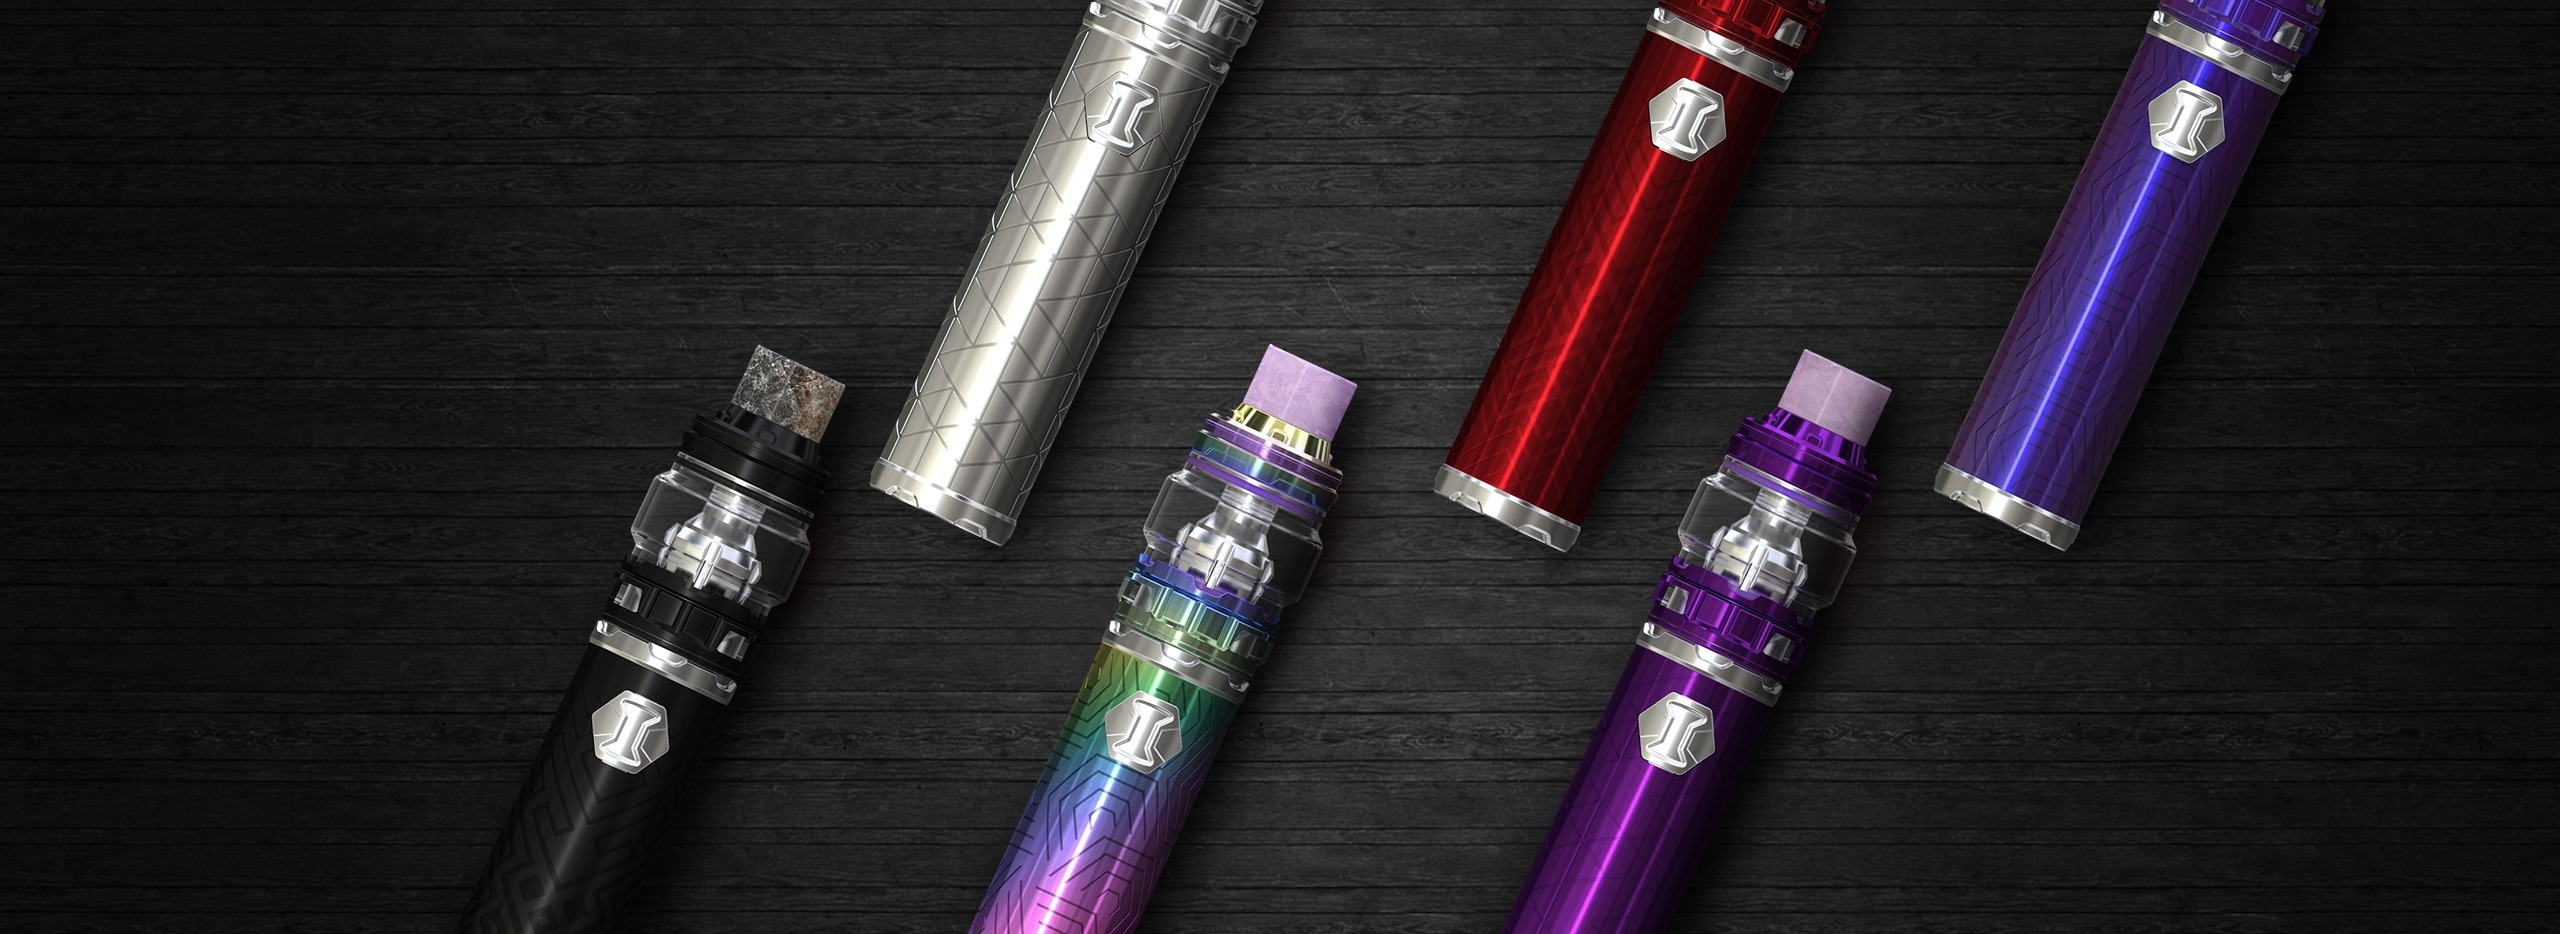 Buy Eleaf iJust 3 with ELLO Duro Kit and enjoy vaping! Find the latest electronic cigarettes from SMOK, VooPoo, Aspire and Joyetech at vape shop!